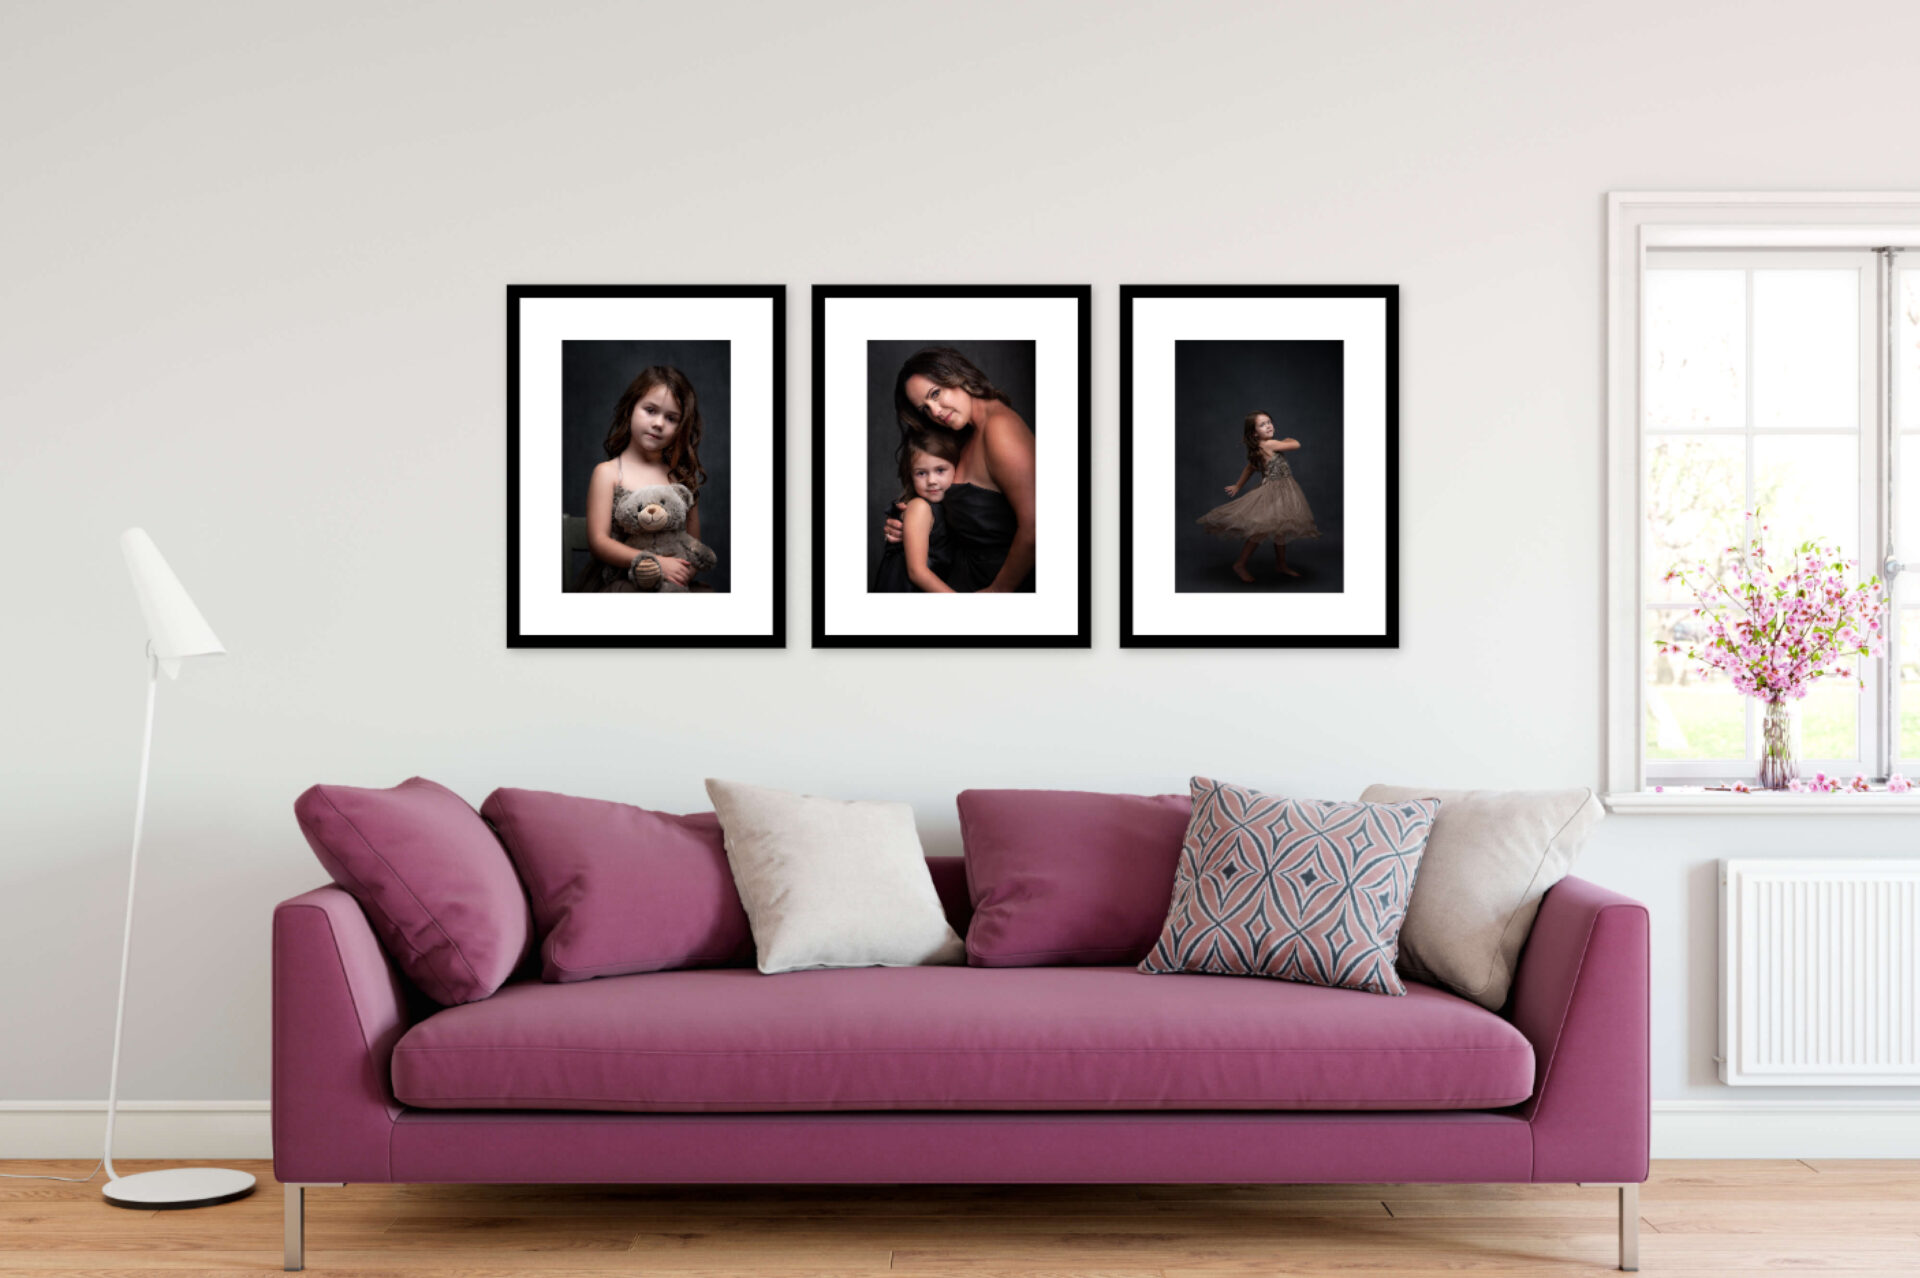 Three framed portraits of a mother and daughter,  hanging on a wall over a purple couch.